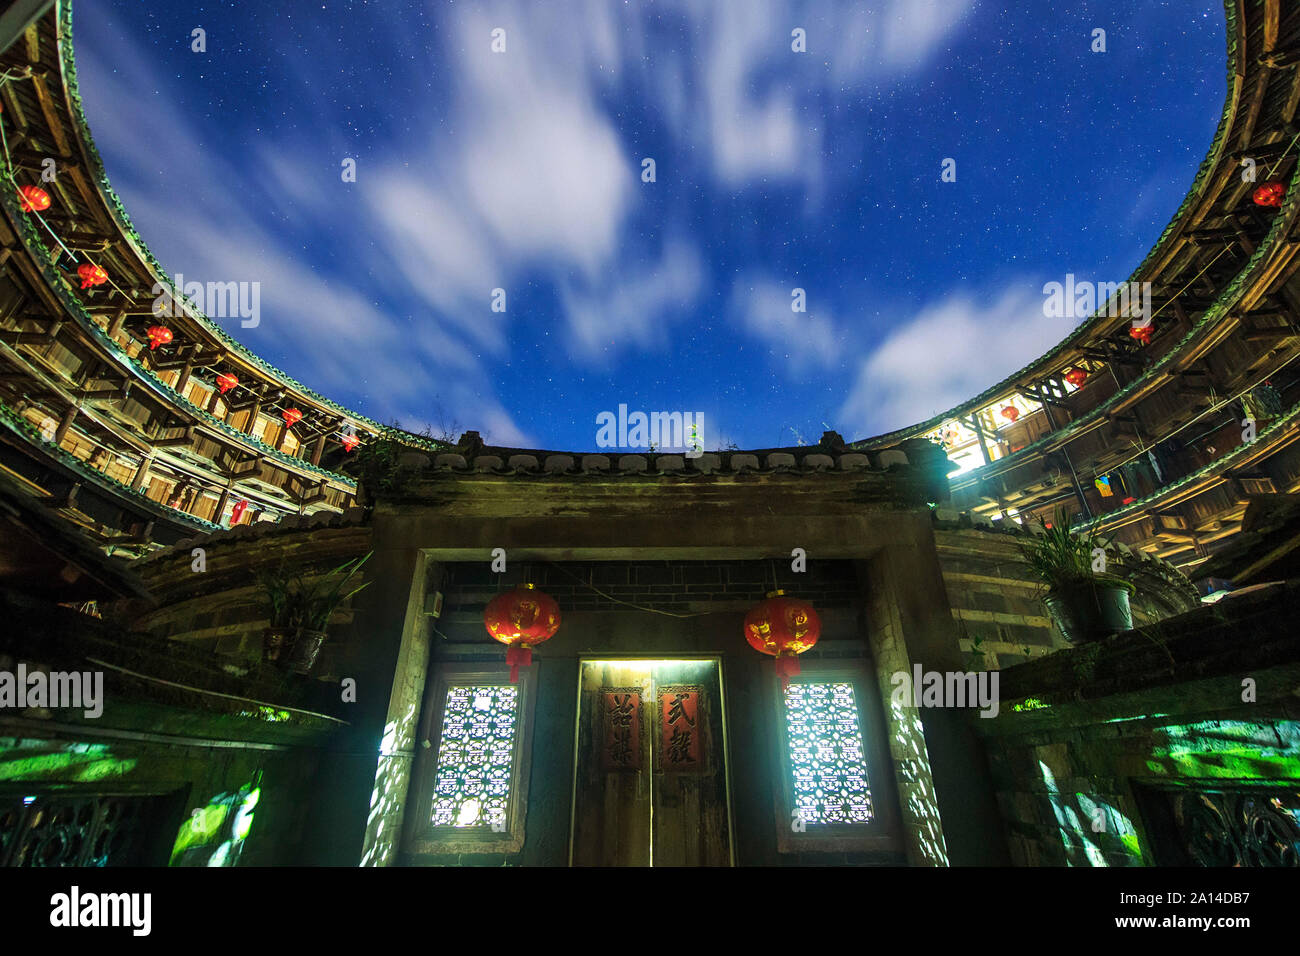 A cloudy night at Fujian tulou, a world heritage site in the Fujian province of China. Stock Photo